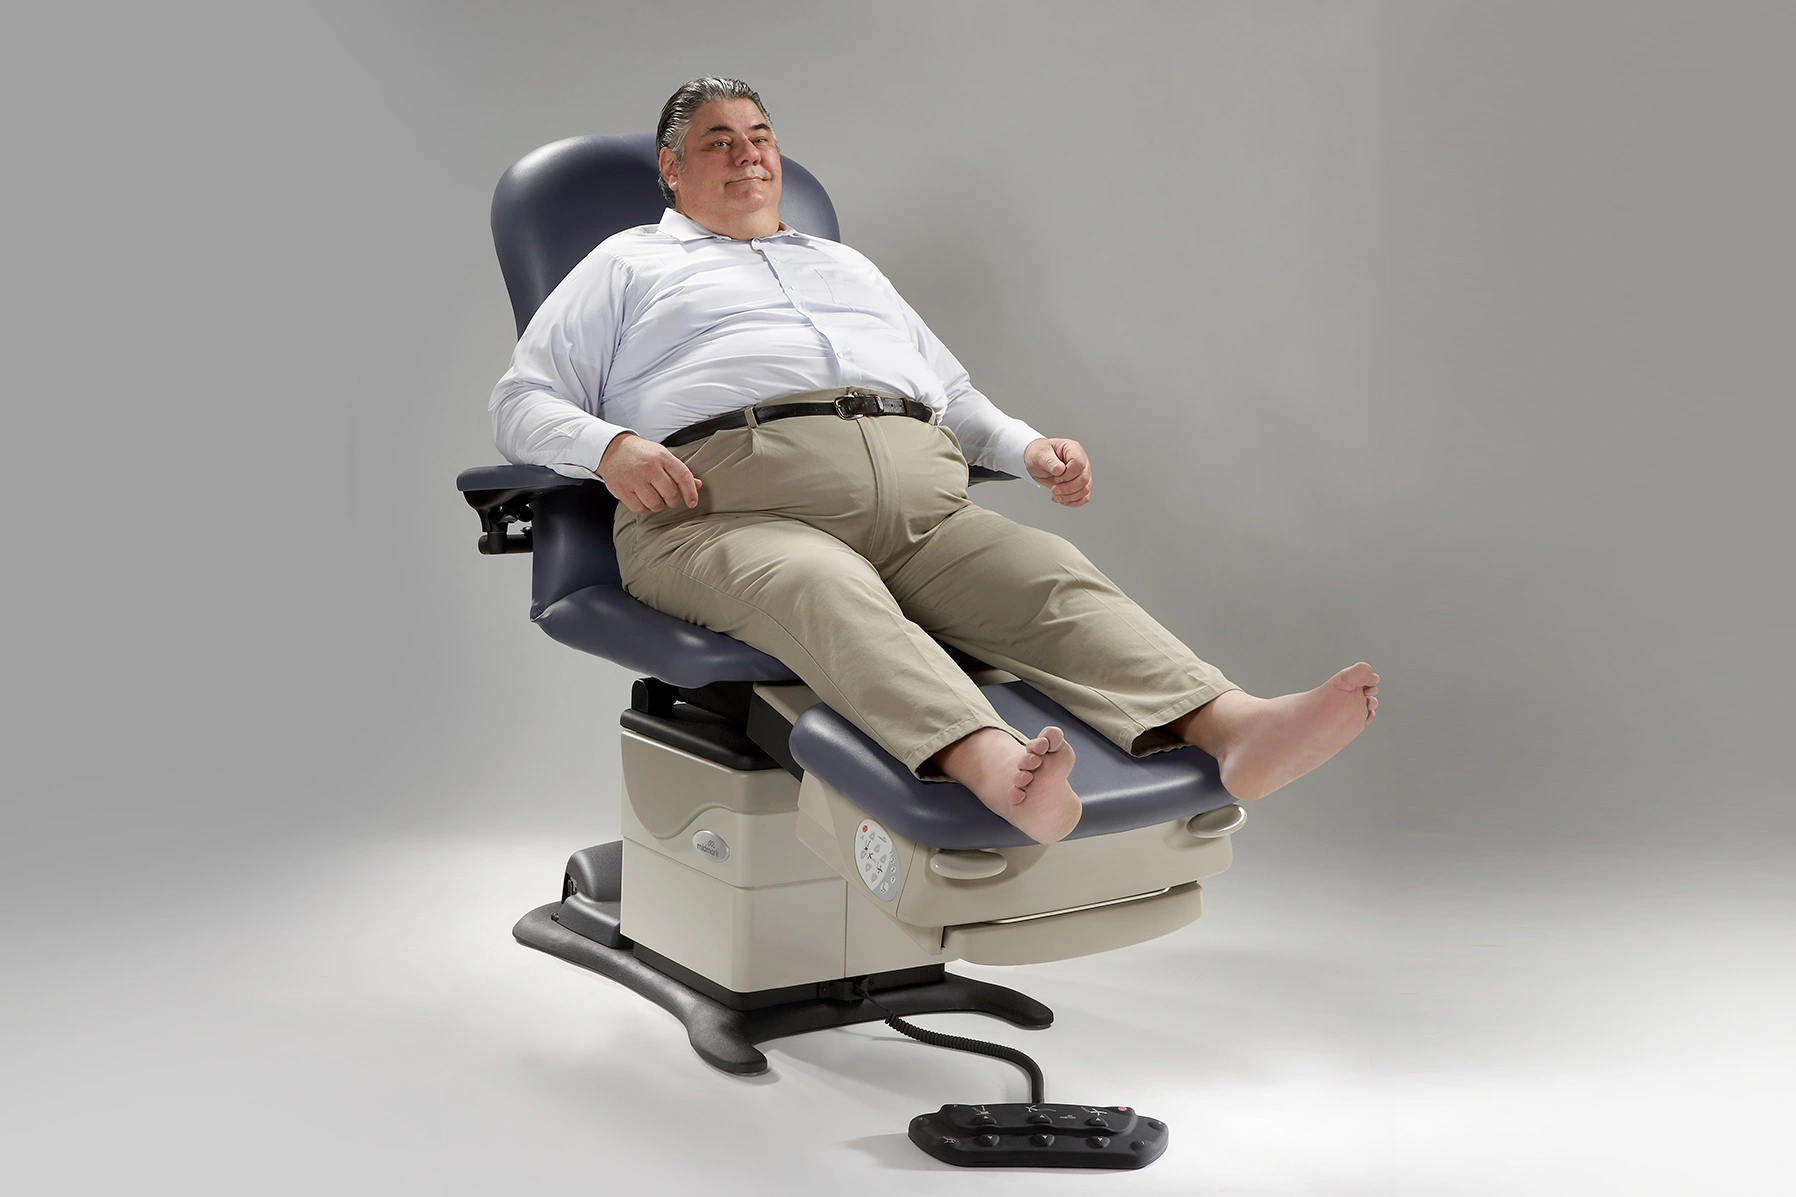 647-podiatry-chair-pic9